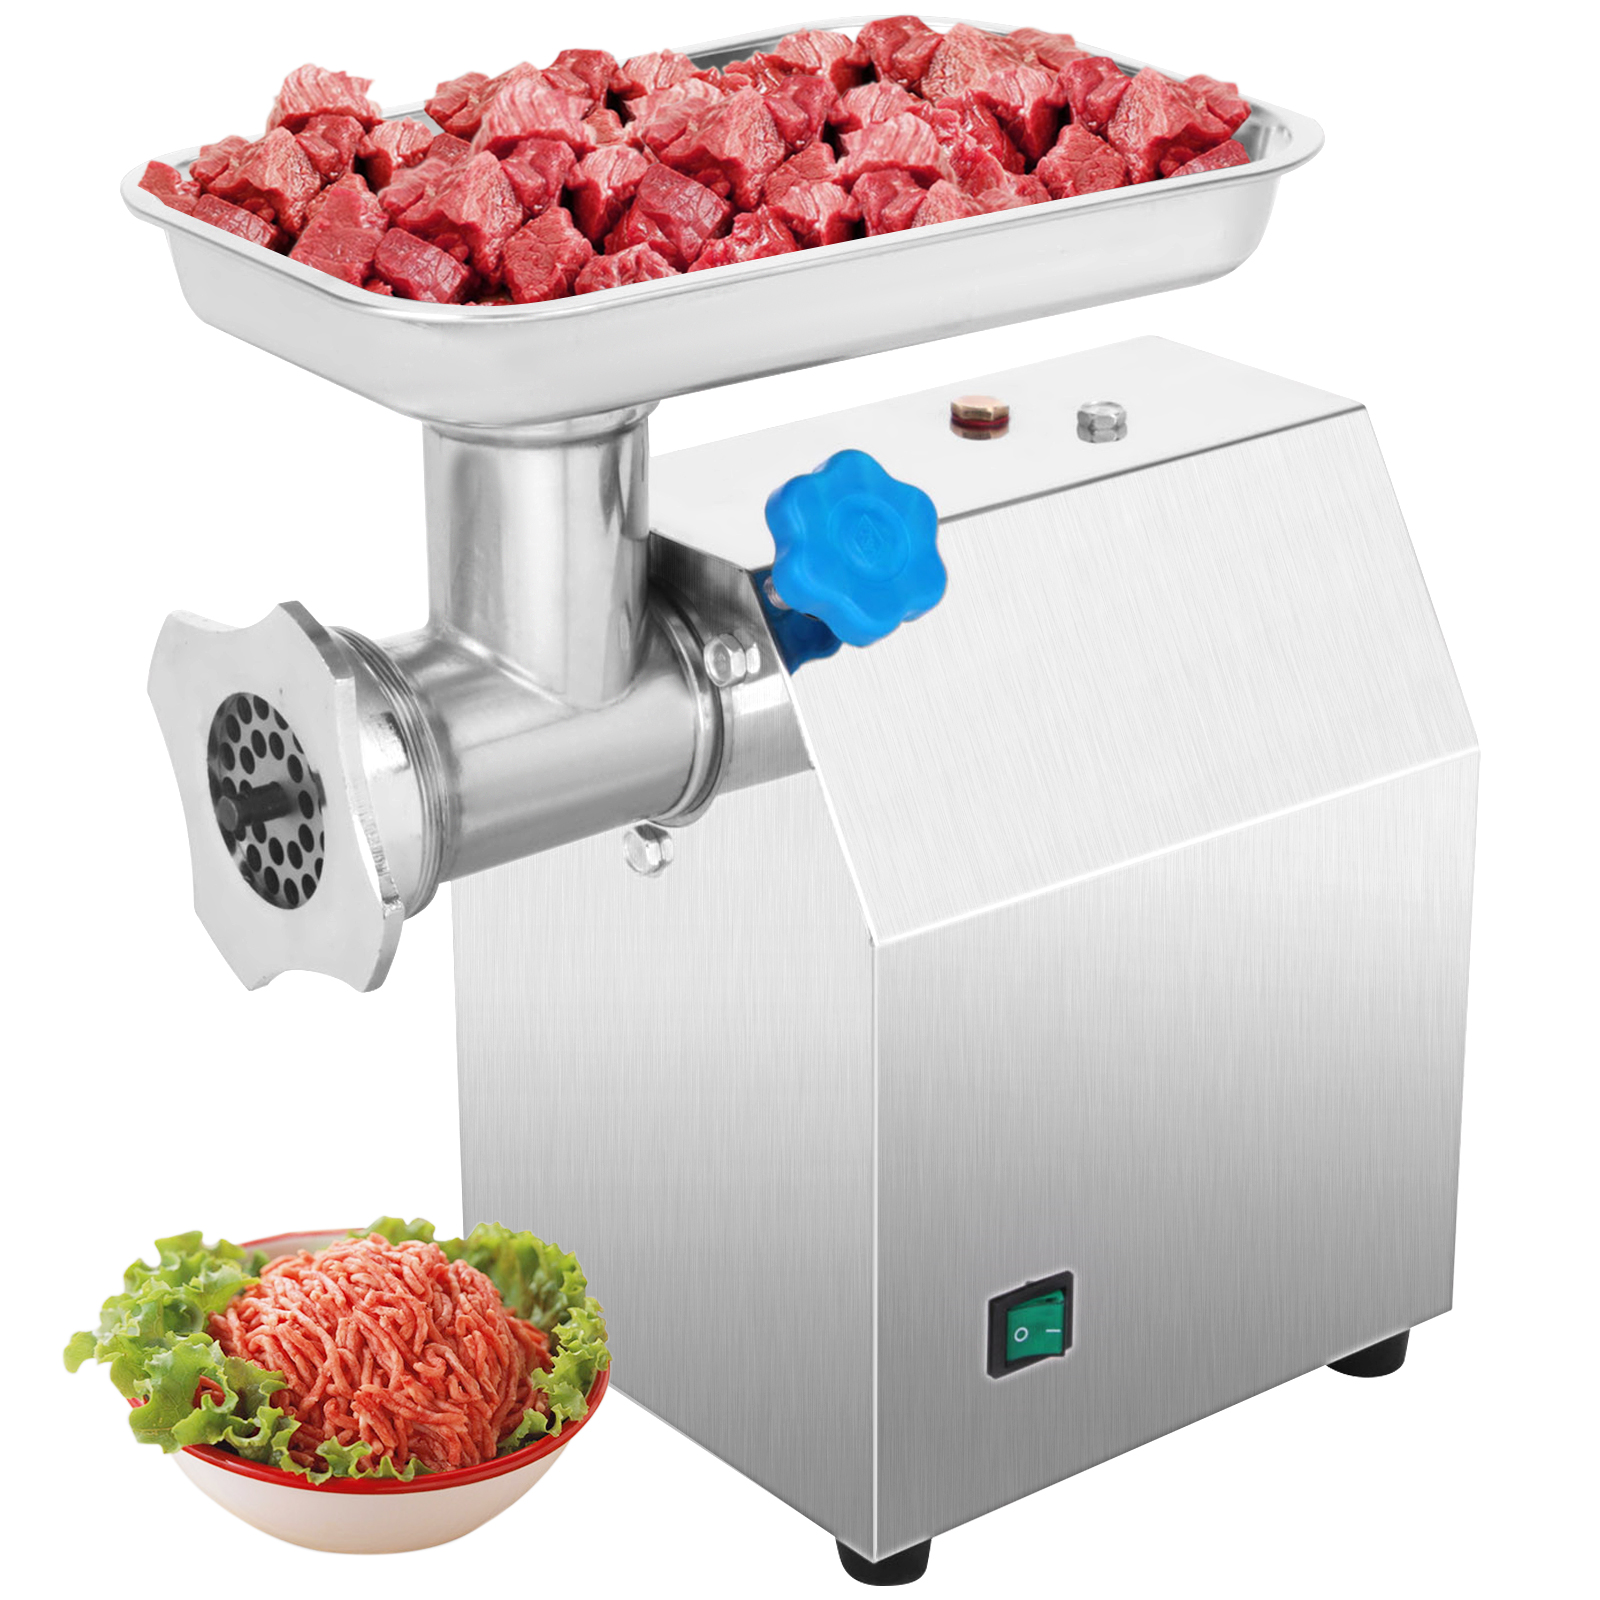 Electric Meat Grinder Stainless Steel Sausage Kubbe Attachment W/2 Blade, 850w от Vevor Many GEOs